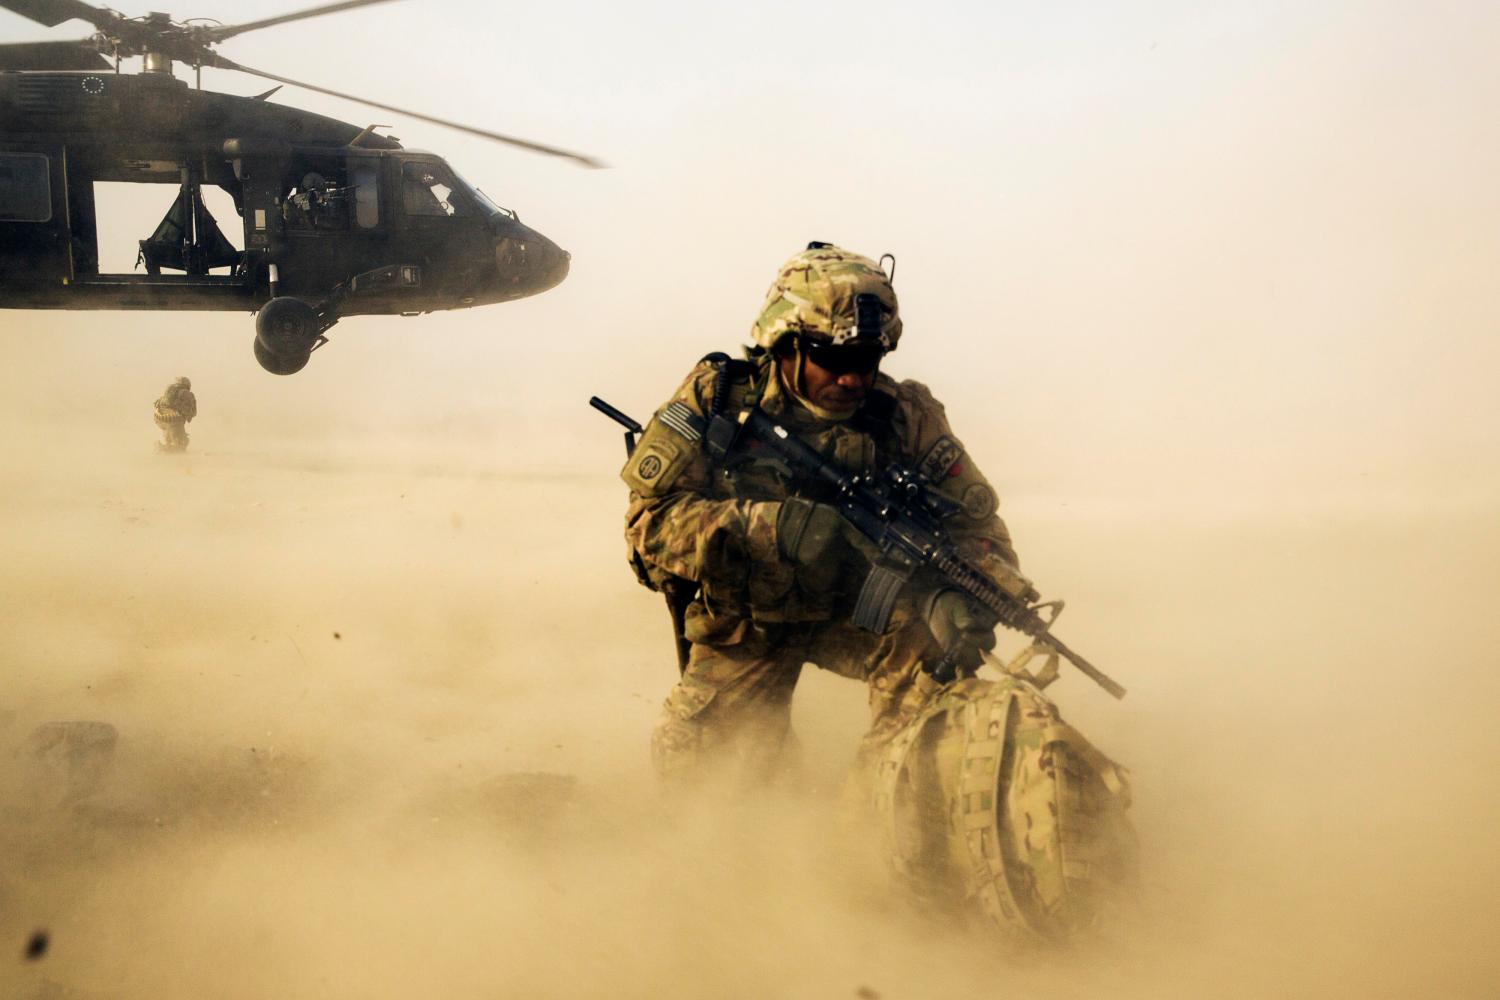 A U.S. soldier from the 3rd Cavalry Regiment shields himself from the rotor wash of a UH-60 Blackhawk helicopter after being dropped off for a mission with the Afghan police near Jalalabad in the Nangarhar province of Afghanistan December 20, 2014. REUTERS/Lucas Jackson (AFGHANISTAN - Tags: TRANSPORT CIVIL UNREST MILITARY POLITICS TPX IMAGES OF THE DAY) - GM1EACK1LDW01